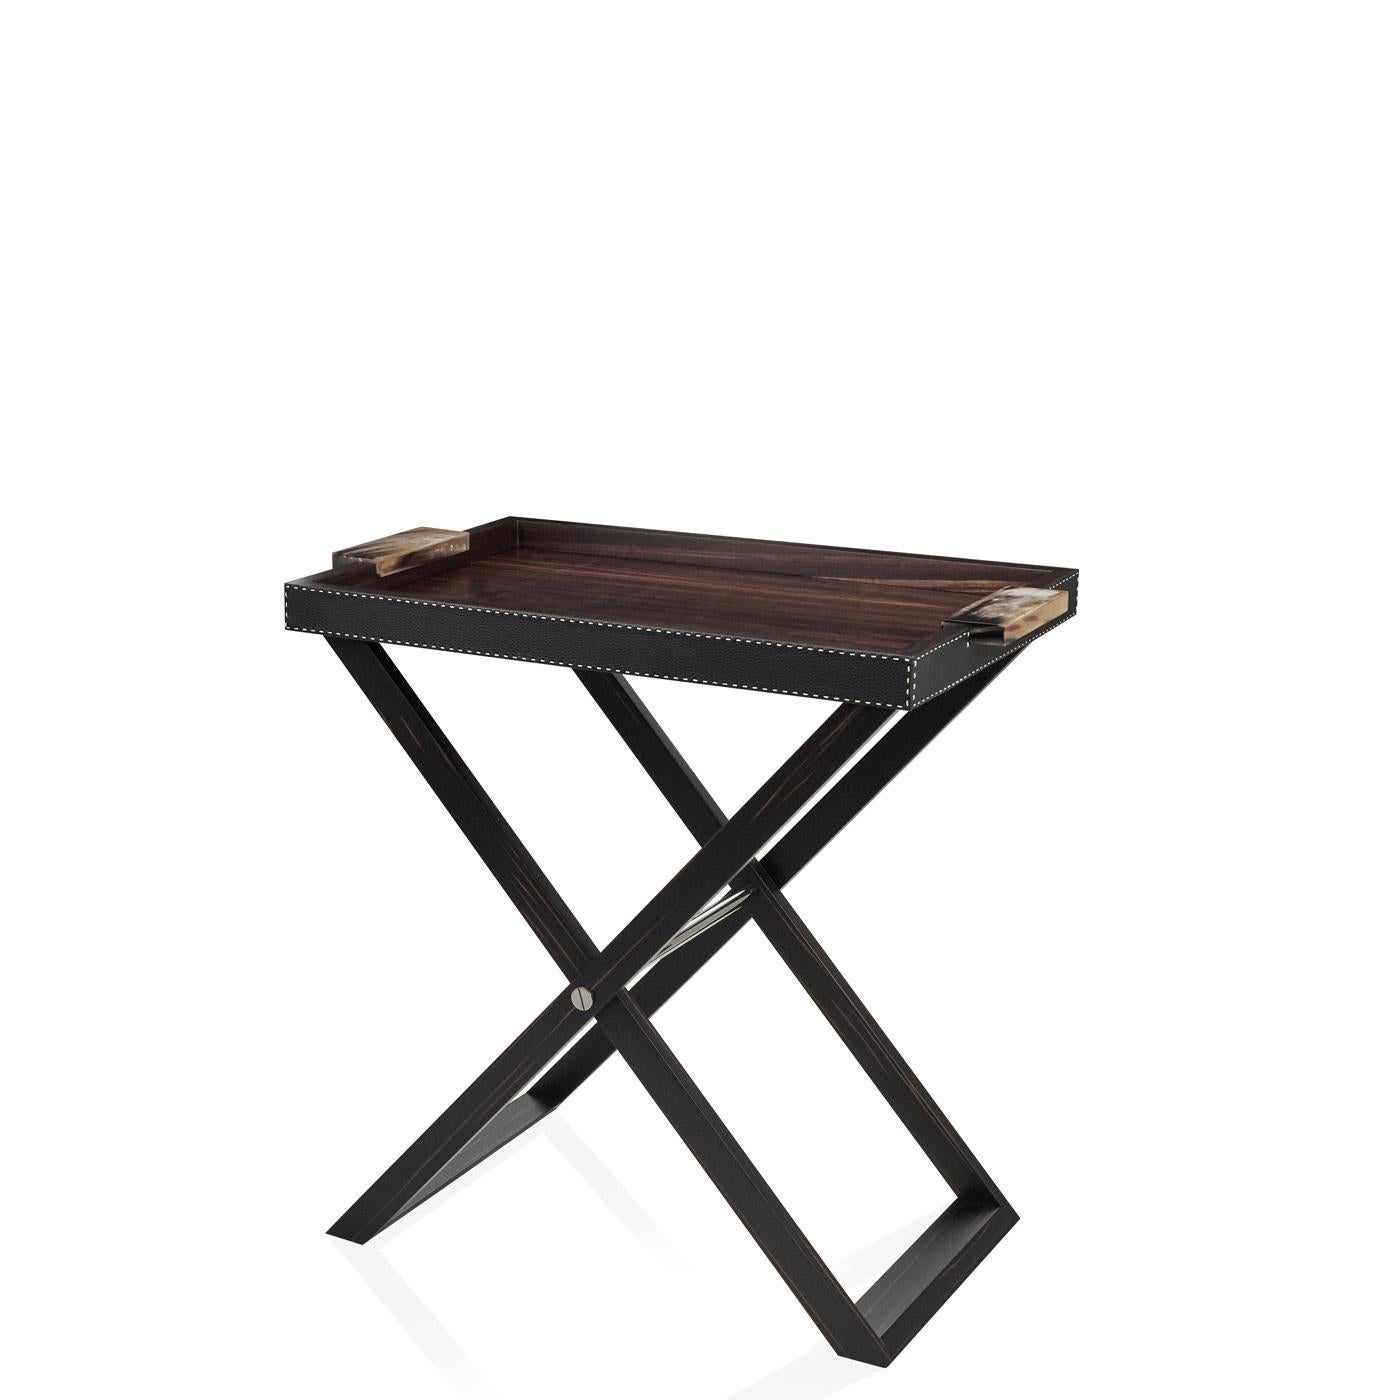 Versatile and elegant, Lipari is a butler’s tray that can be used both for serving drinks and as an extension of the side table. The tray in matte Amara ebony veneer and Aida pebbled leather, Onyx colour rests on a folding structure in wood. The